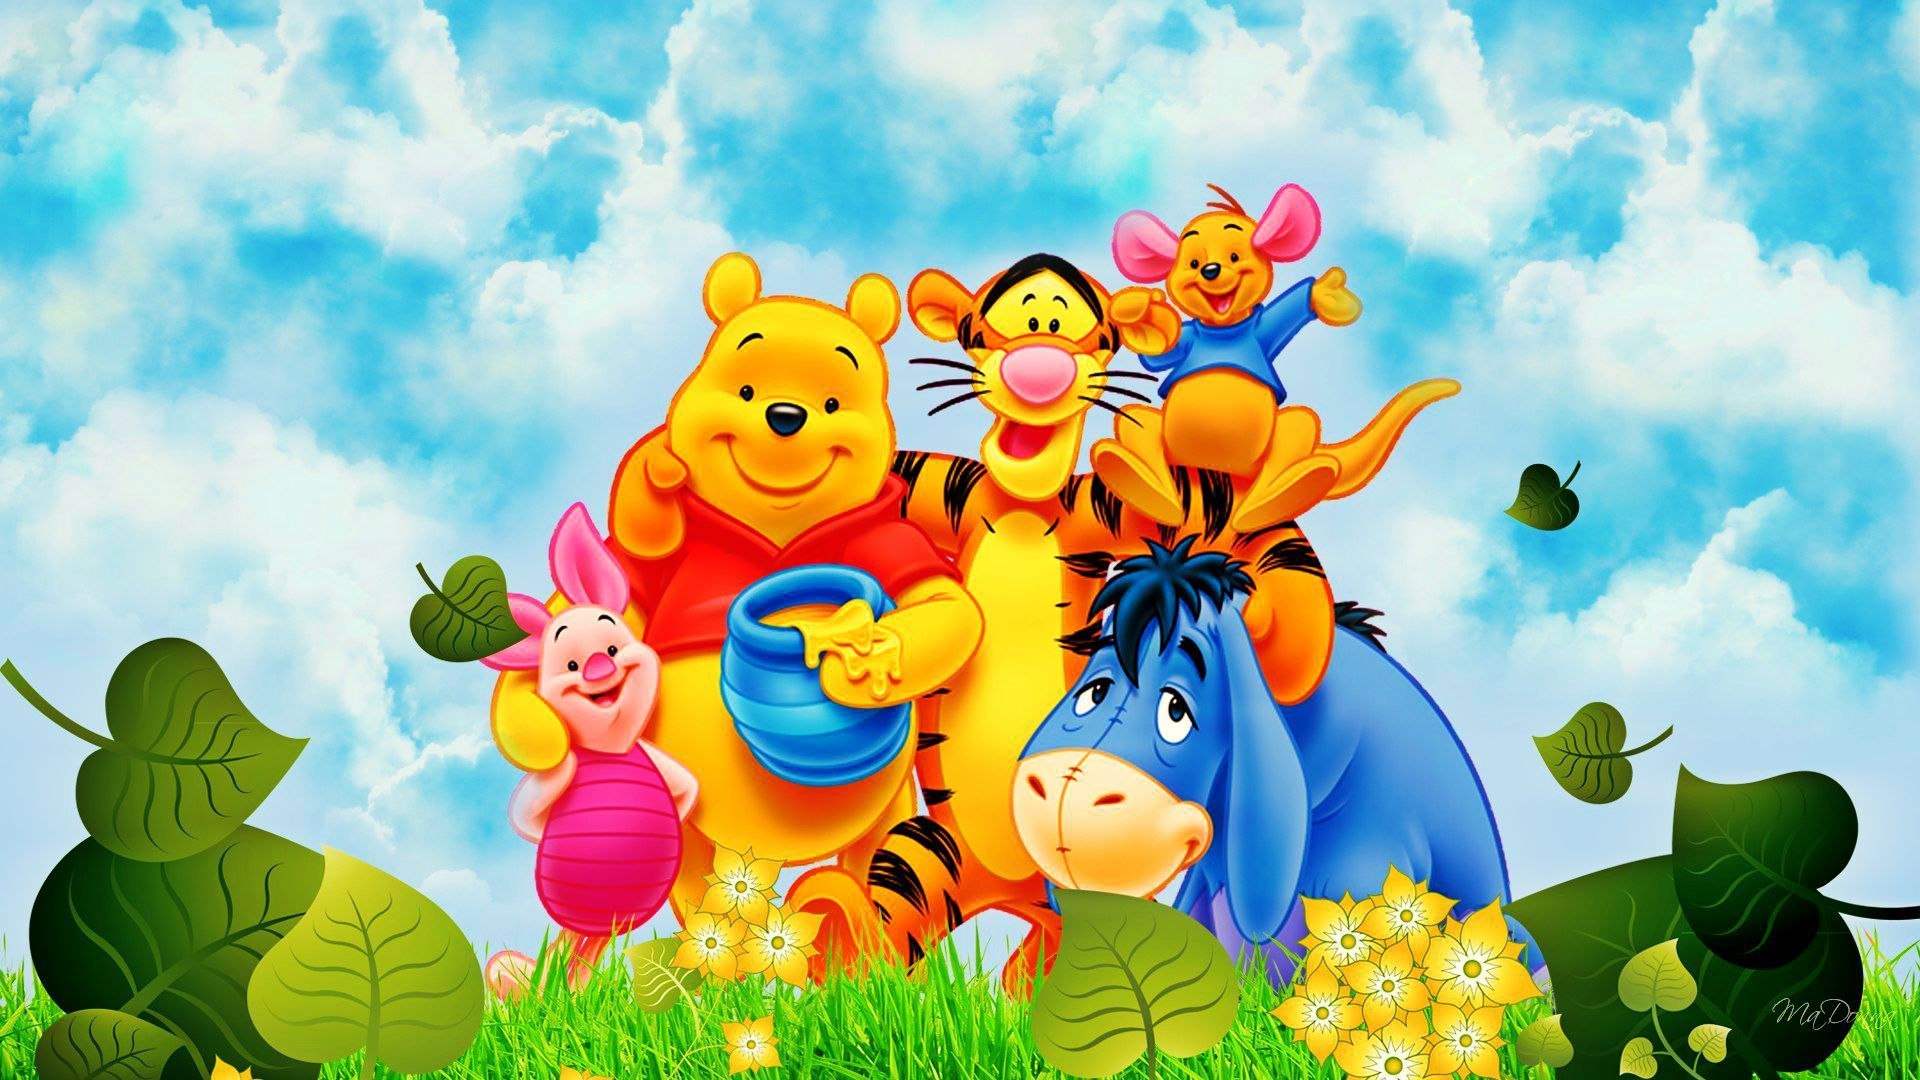 Winnie the Pooh and Friends Wallpapers on WallpaperDog